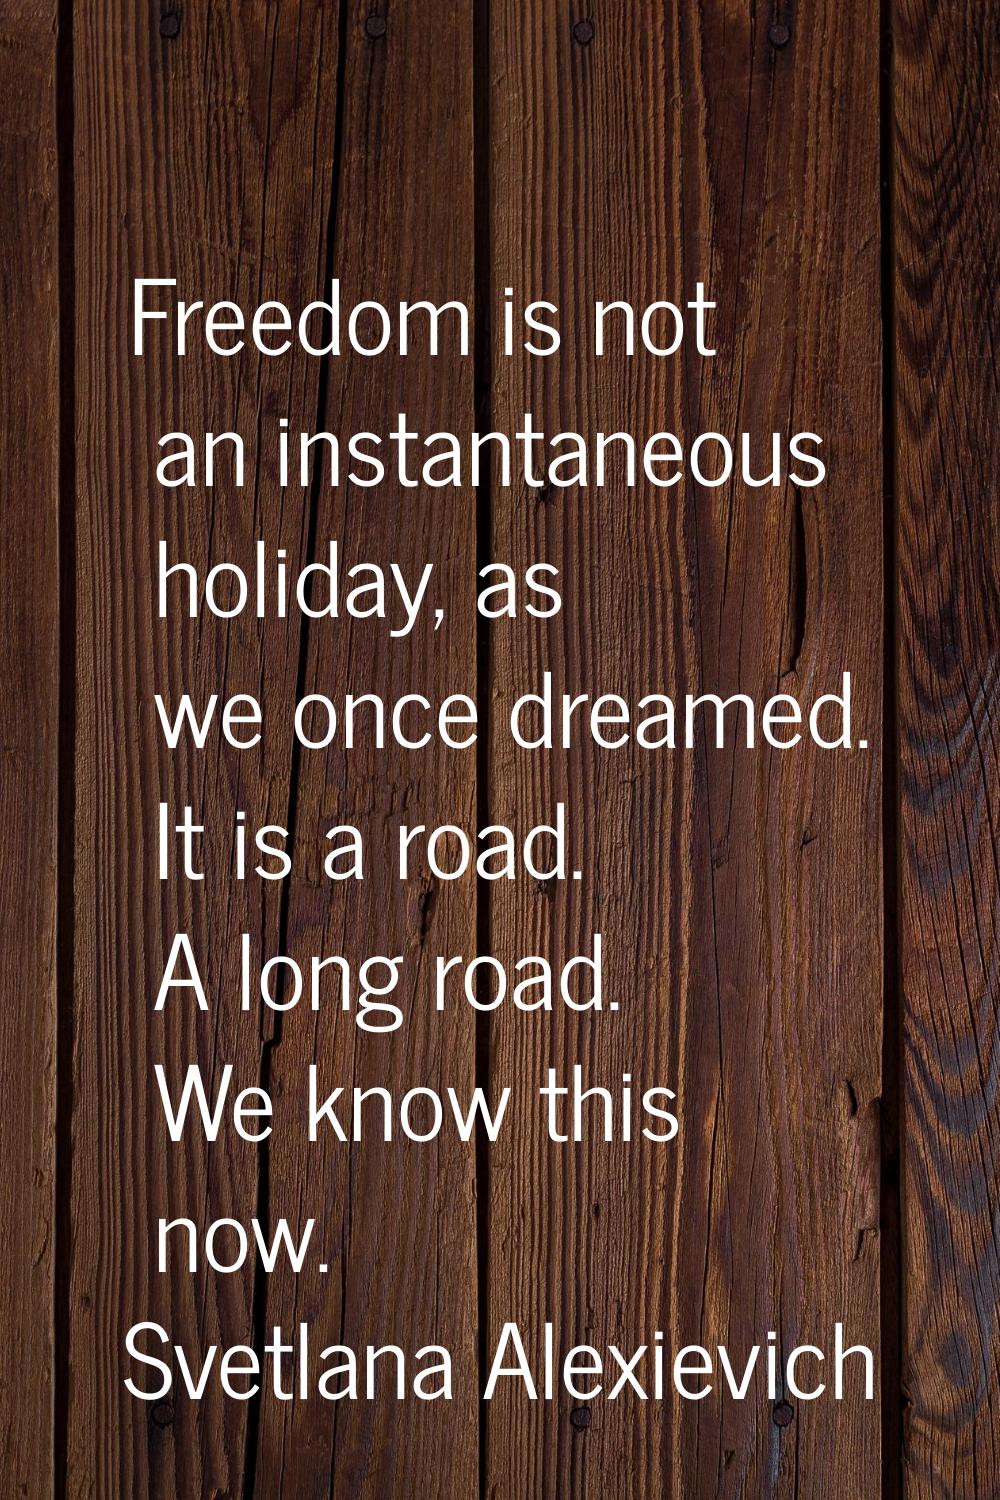 Freedom is not an instantaneous holiday, as we once dreamed. It is a road. A long road. We know thi